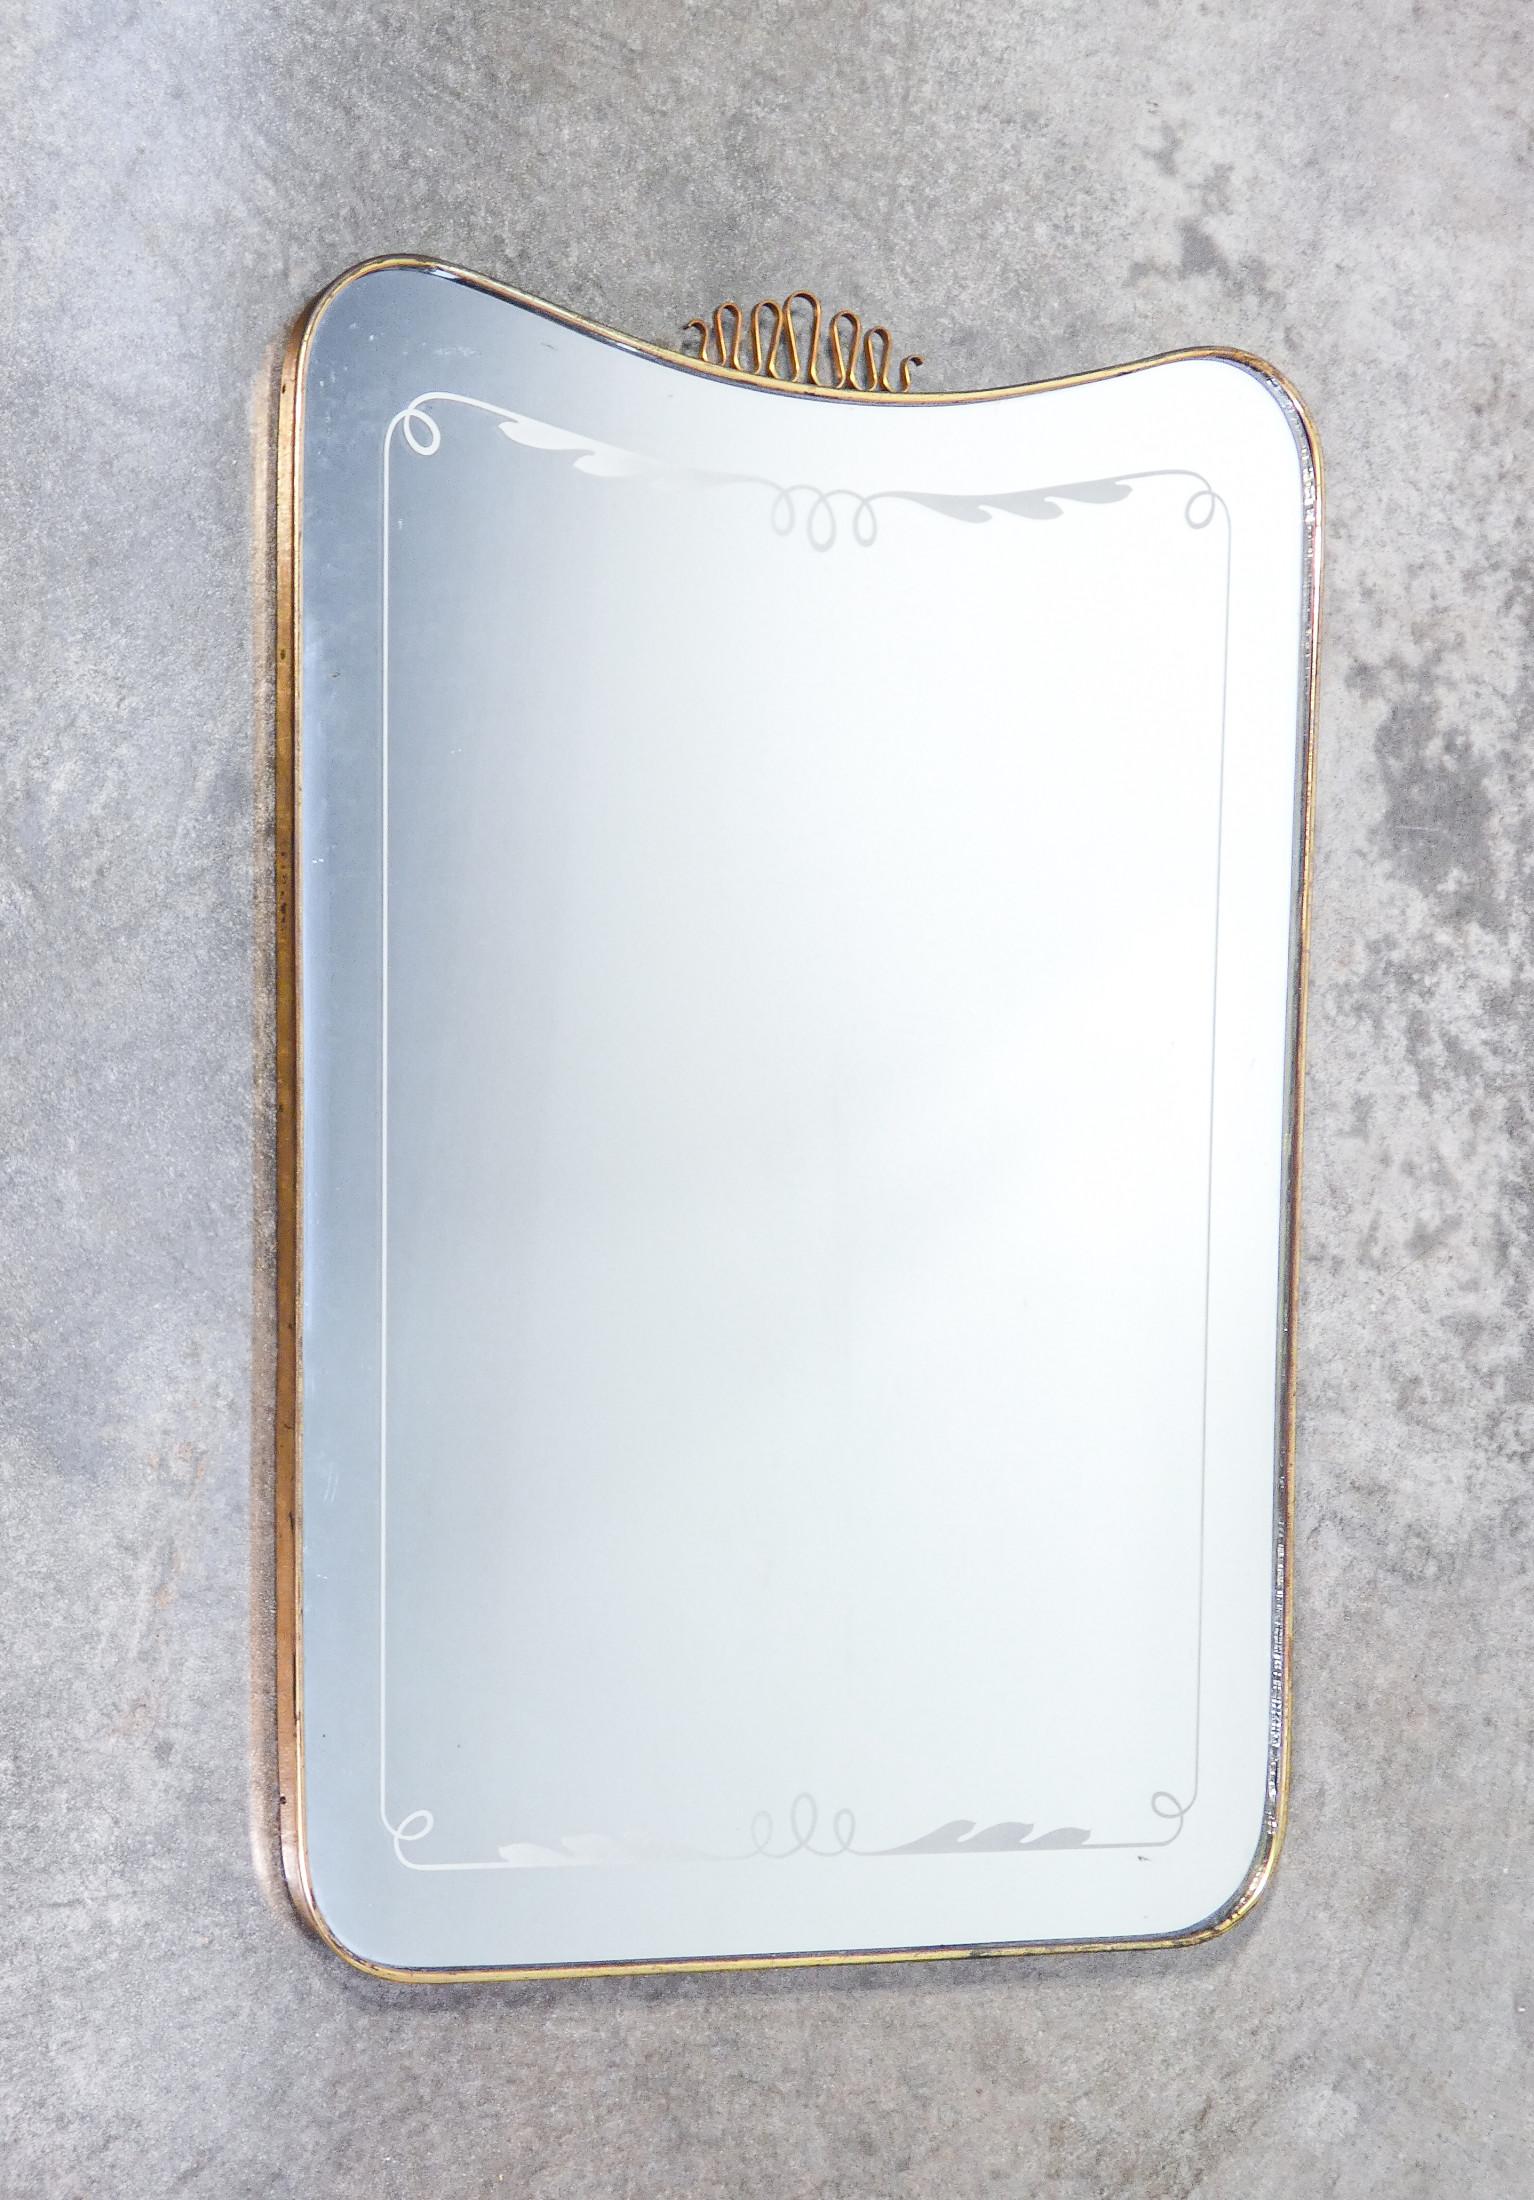 Wall mirror,
design Giò PONTI.

ORIGIN
Italy

PERIOD
1950s

DESIGNER
Gio PONTI
(1891-1979) was an influential Italian architect and designer, among the best known on the Italian and world stage. He graduated in architecture from the Milan